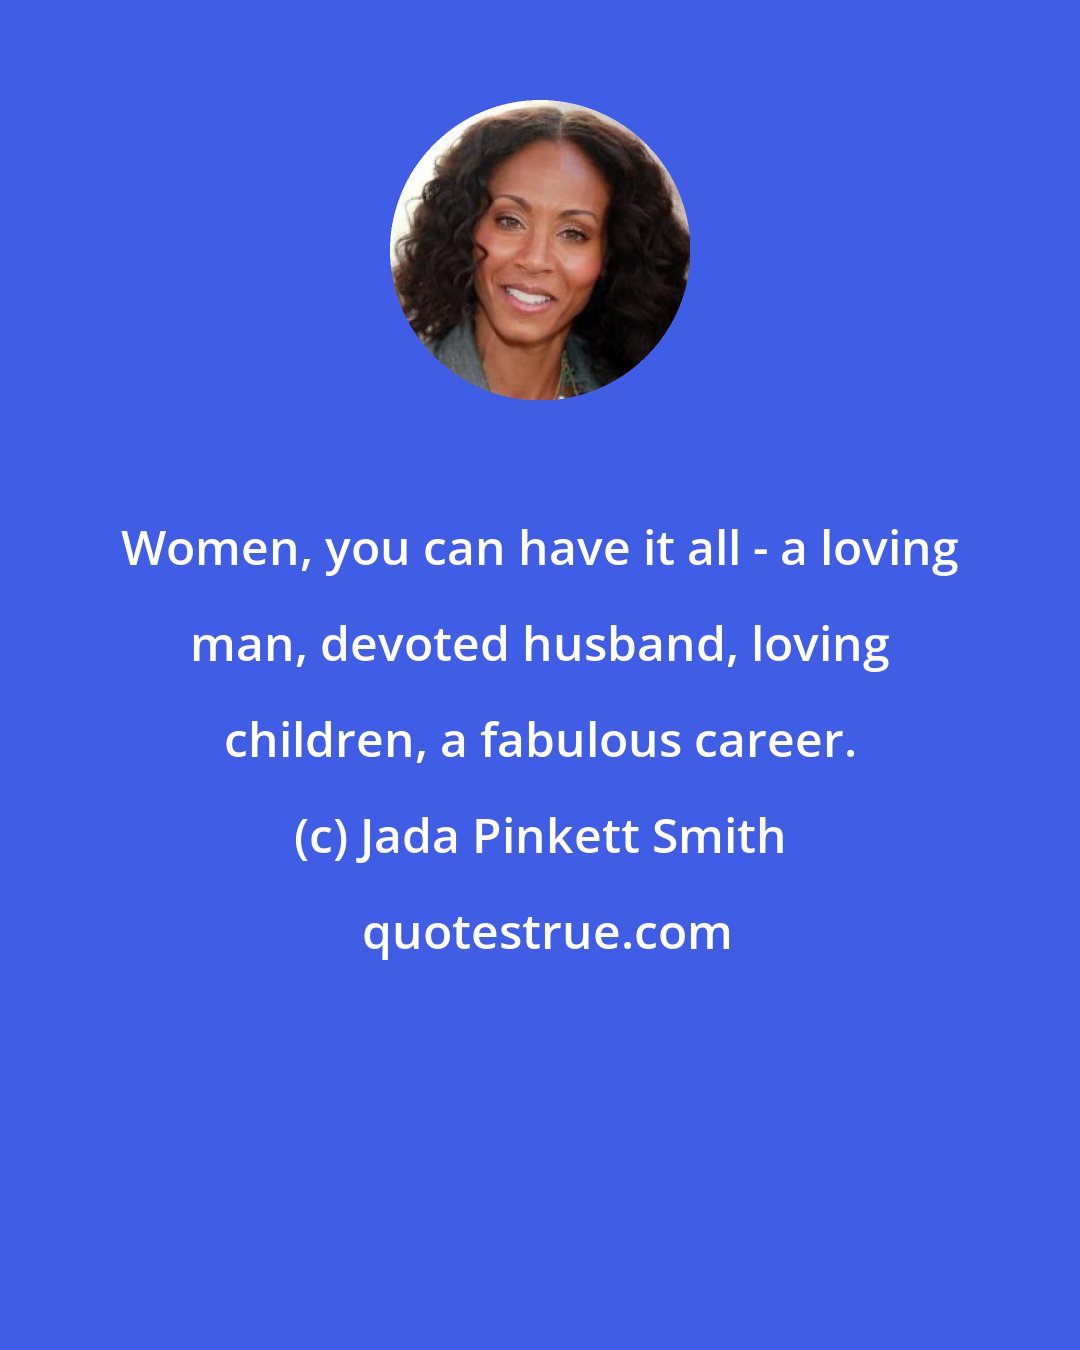 Jada Pinkett Smith: Women, you can have it all - a loving man, devoted husband, loving children, a fabulous career.